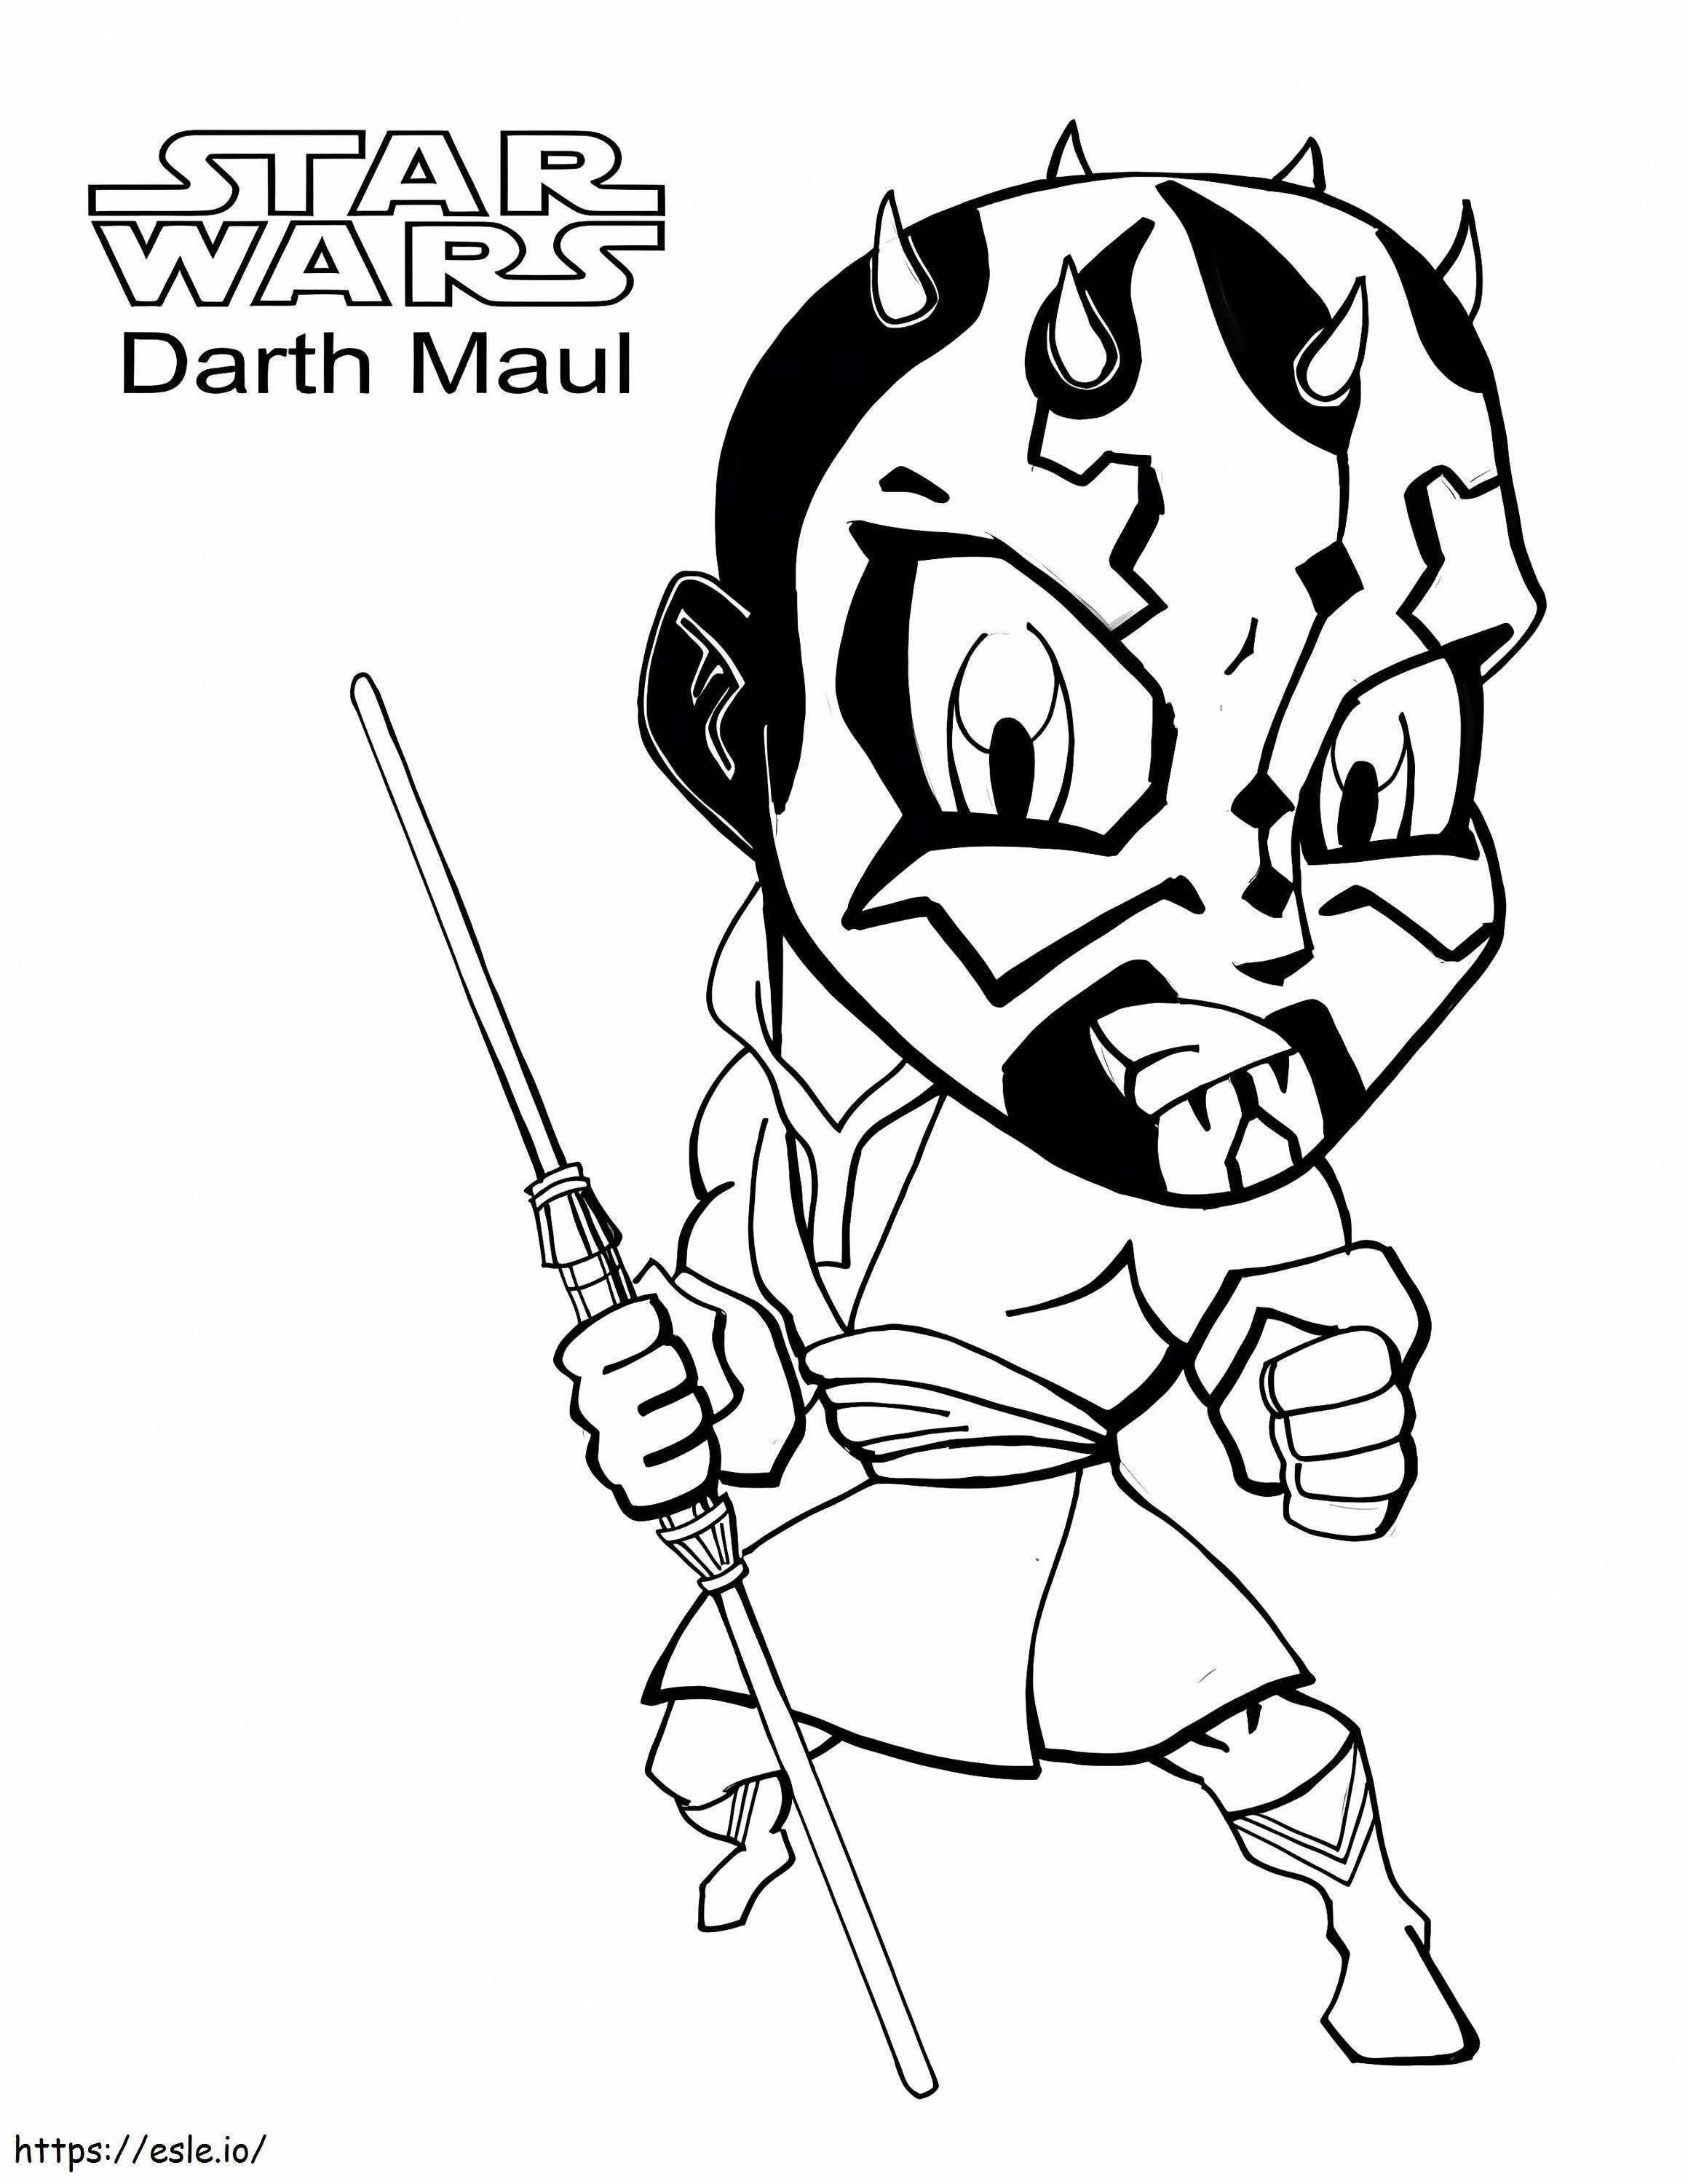 Little Darth Maul coloring page